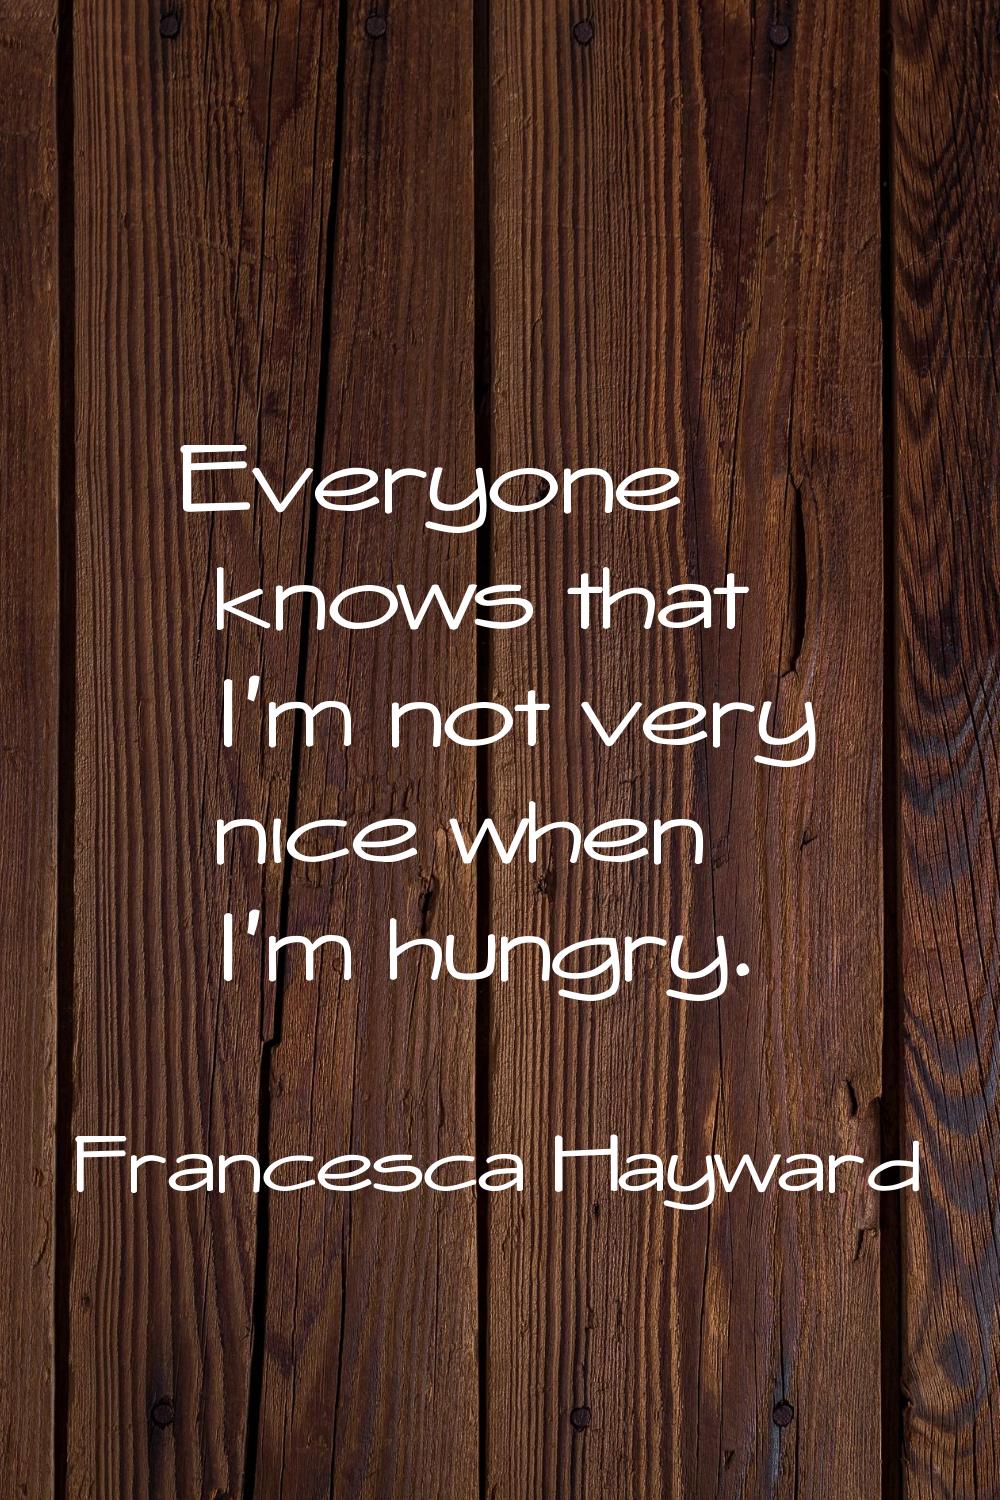 Everyone knows that I'm not very nice when I'm hungry.